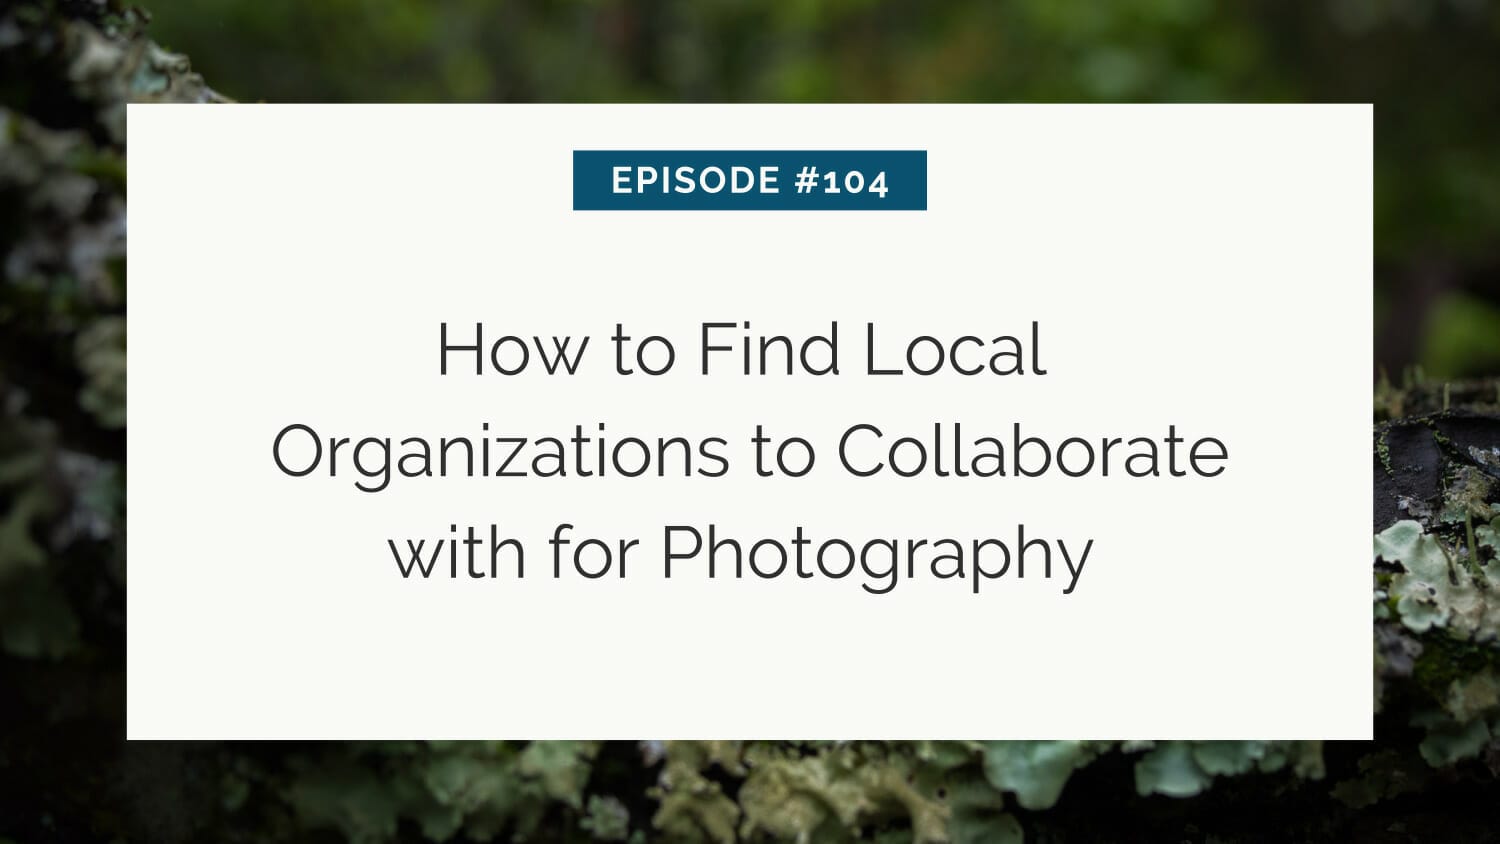 Title slide for episode #104 about finding local organizations to collaborate with for photography, set against a blurred natural background.